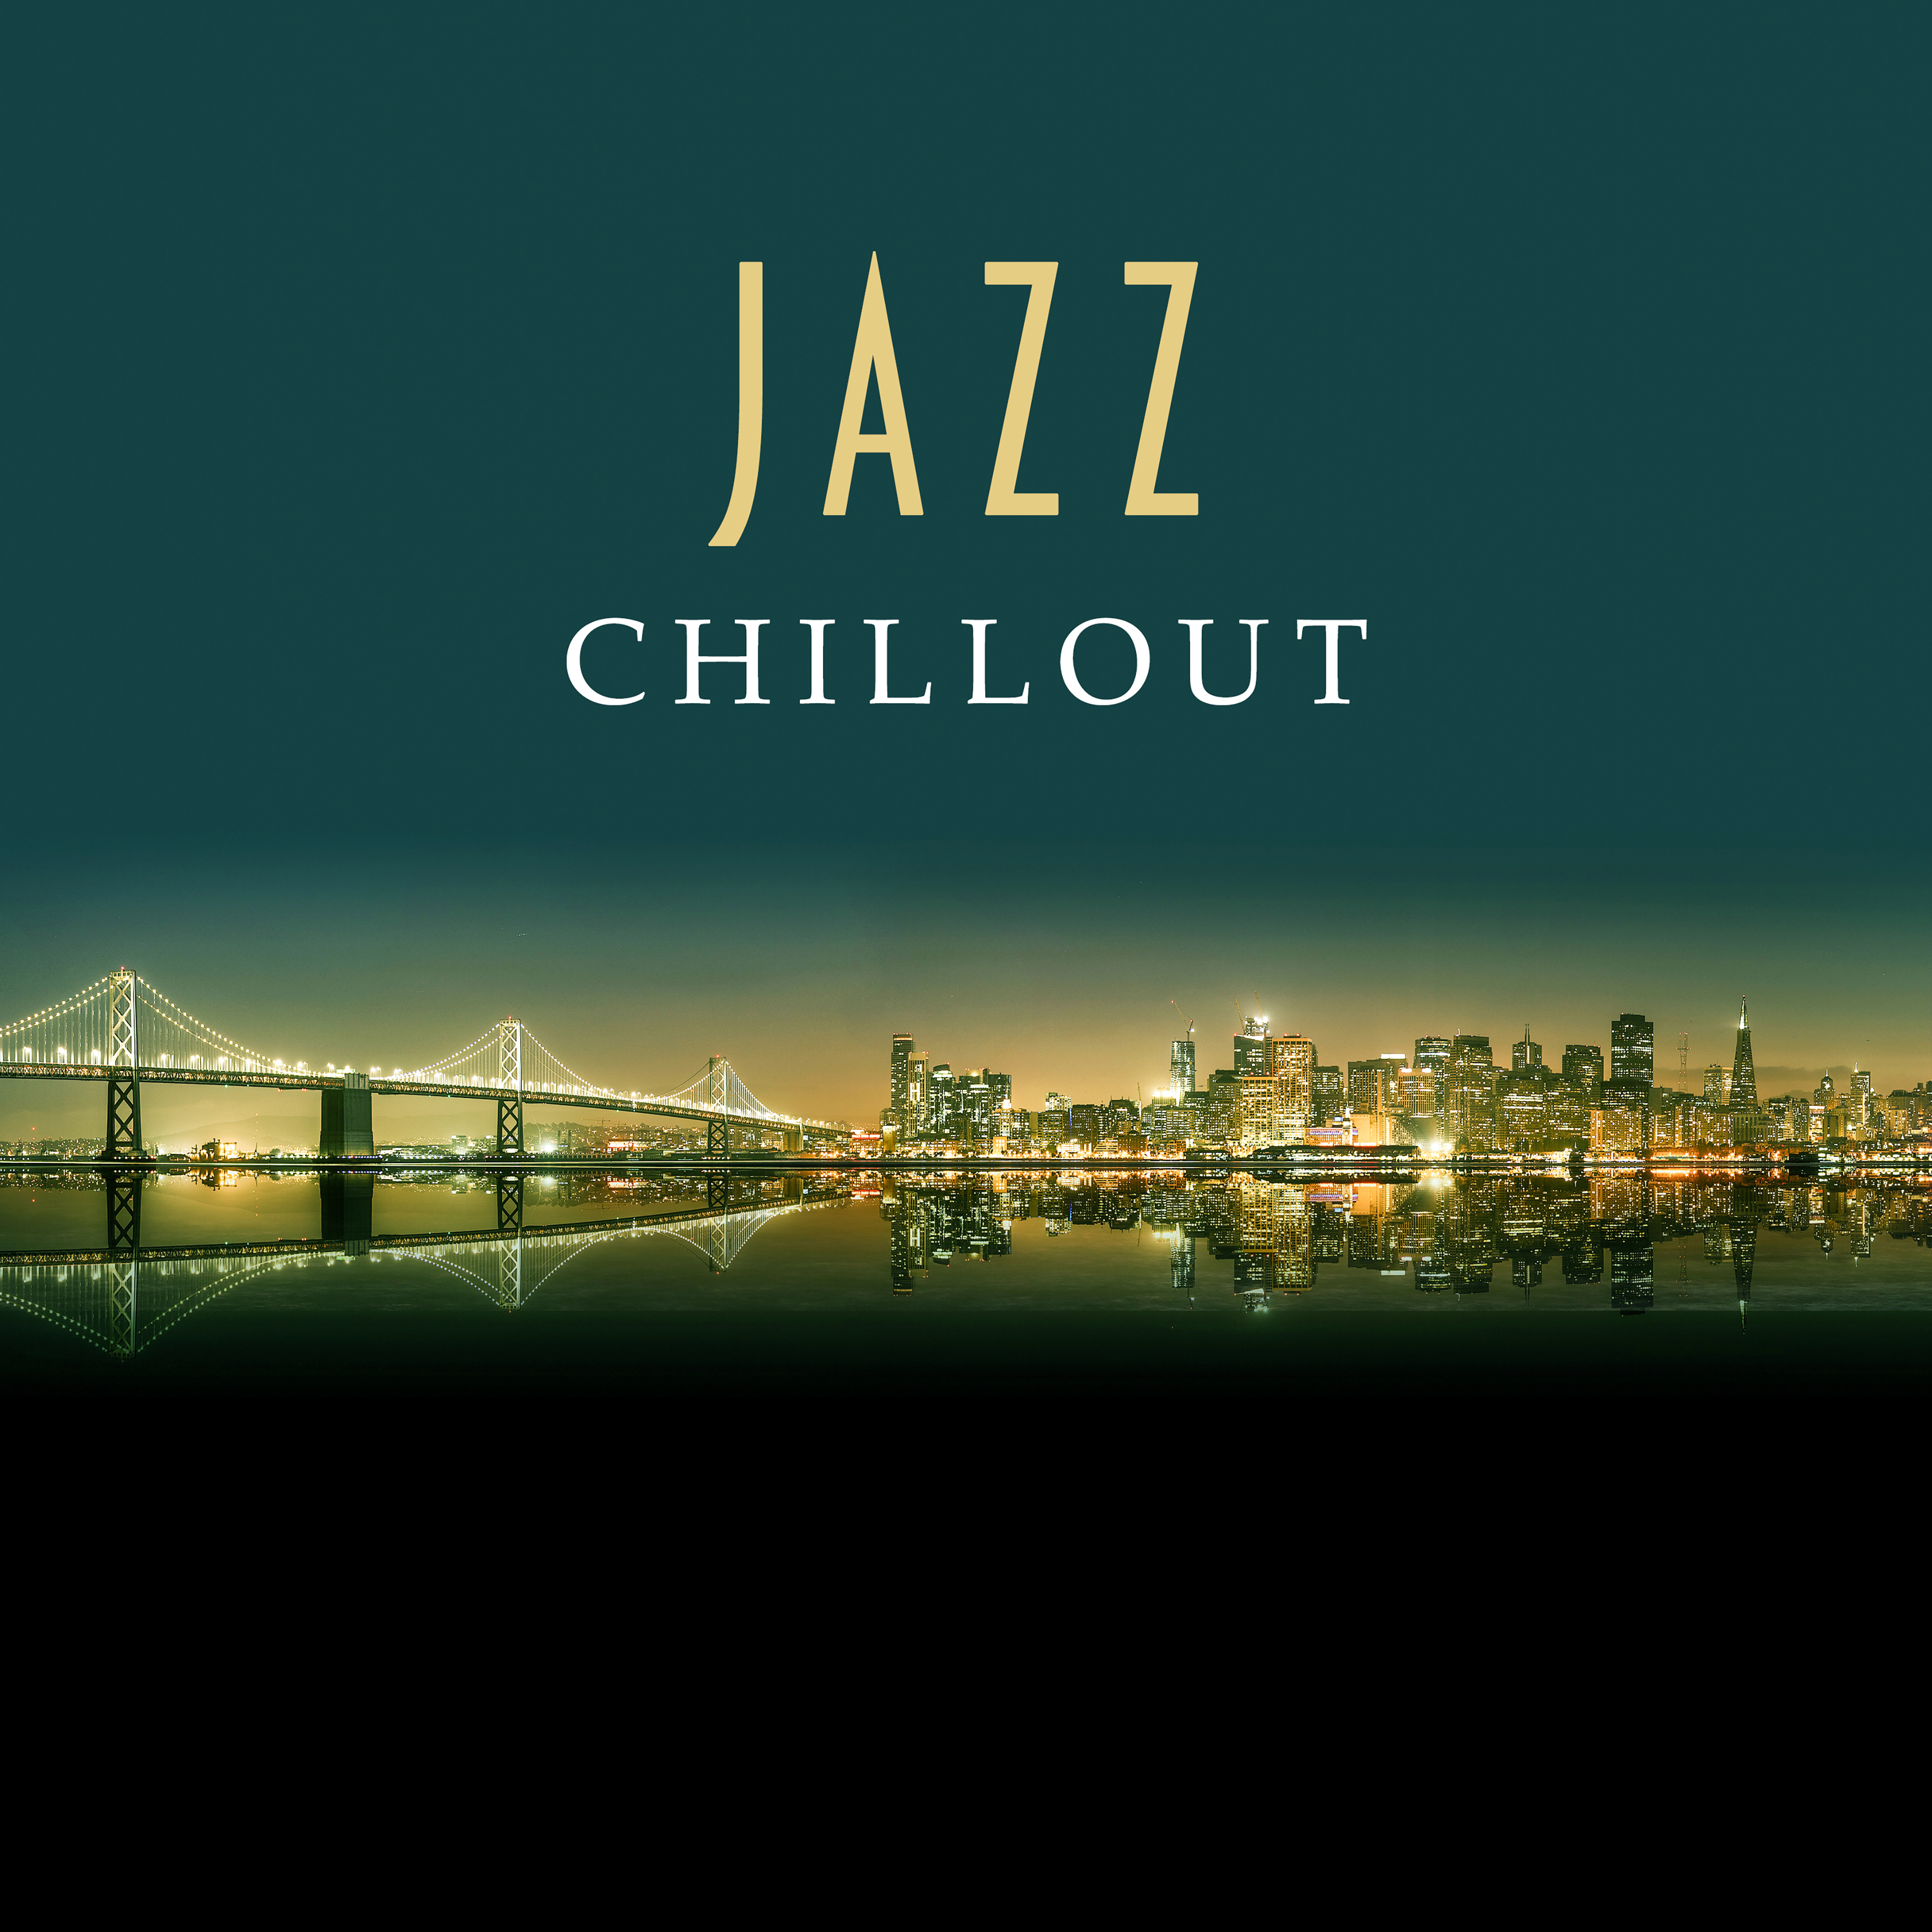 Jazz Chillout – Relaxed Jazz, Peaceful Piano, Jazz Lounge, Ambient Instrumental